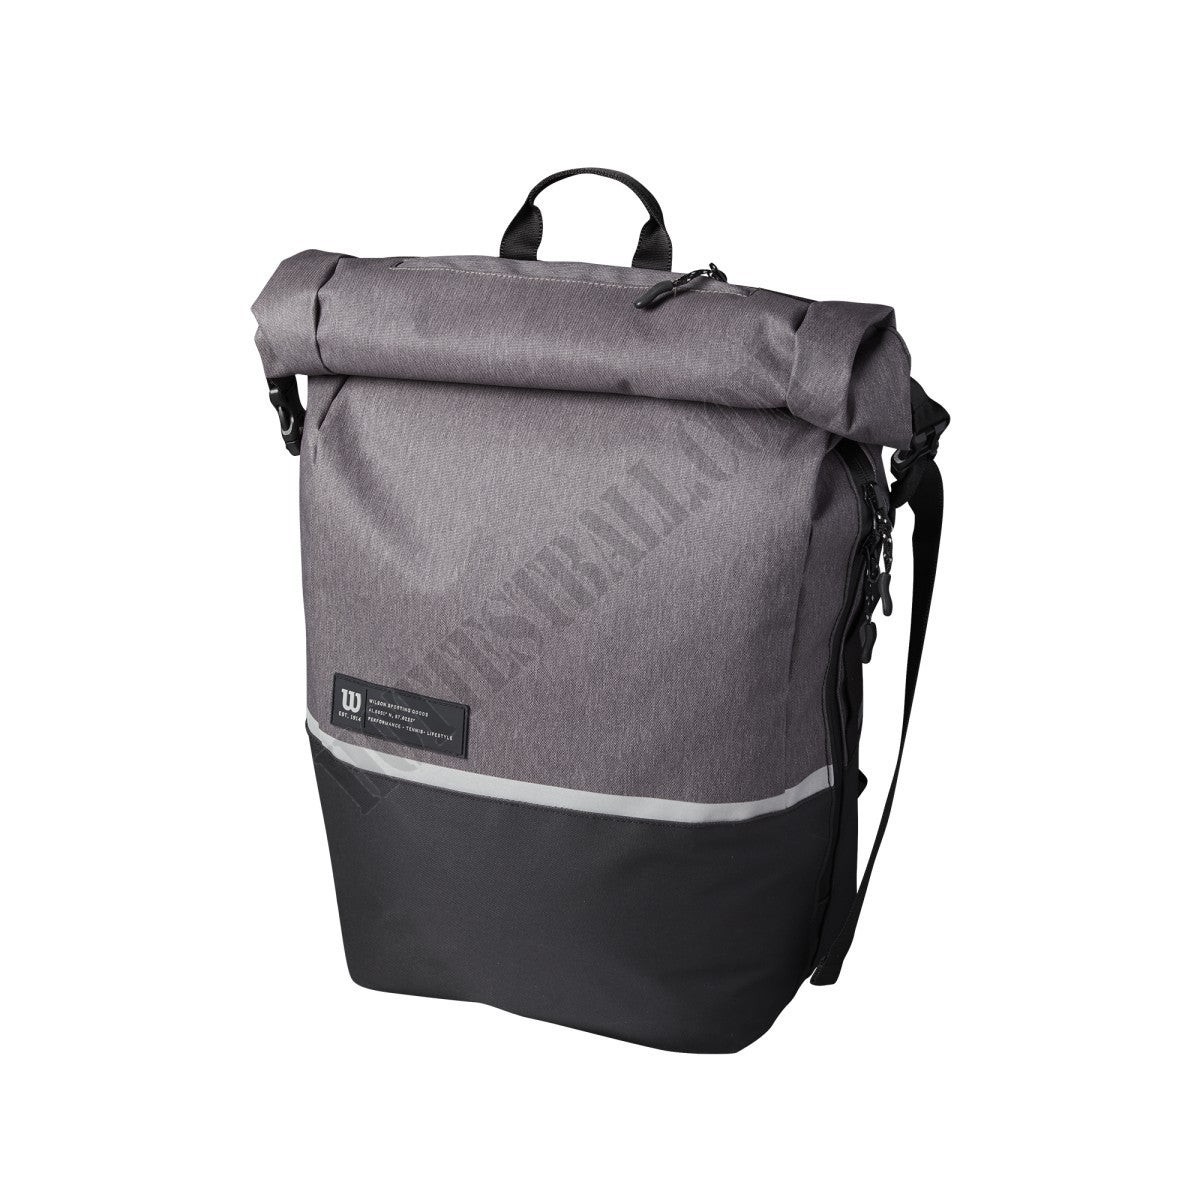 Roll Top Backpack - Wilson Discount Store - Roll Top Backpack - Wilson Discount Store